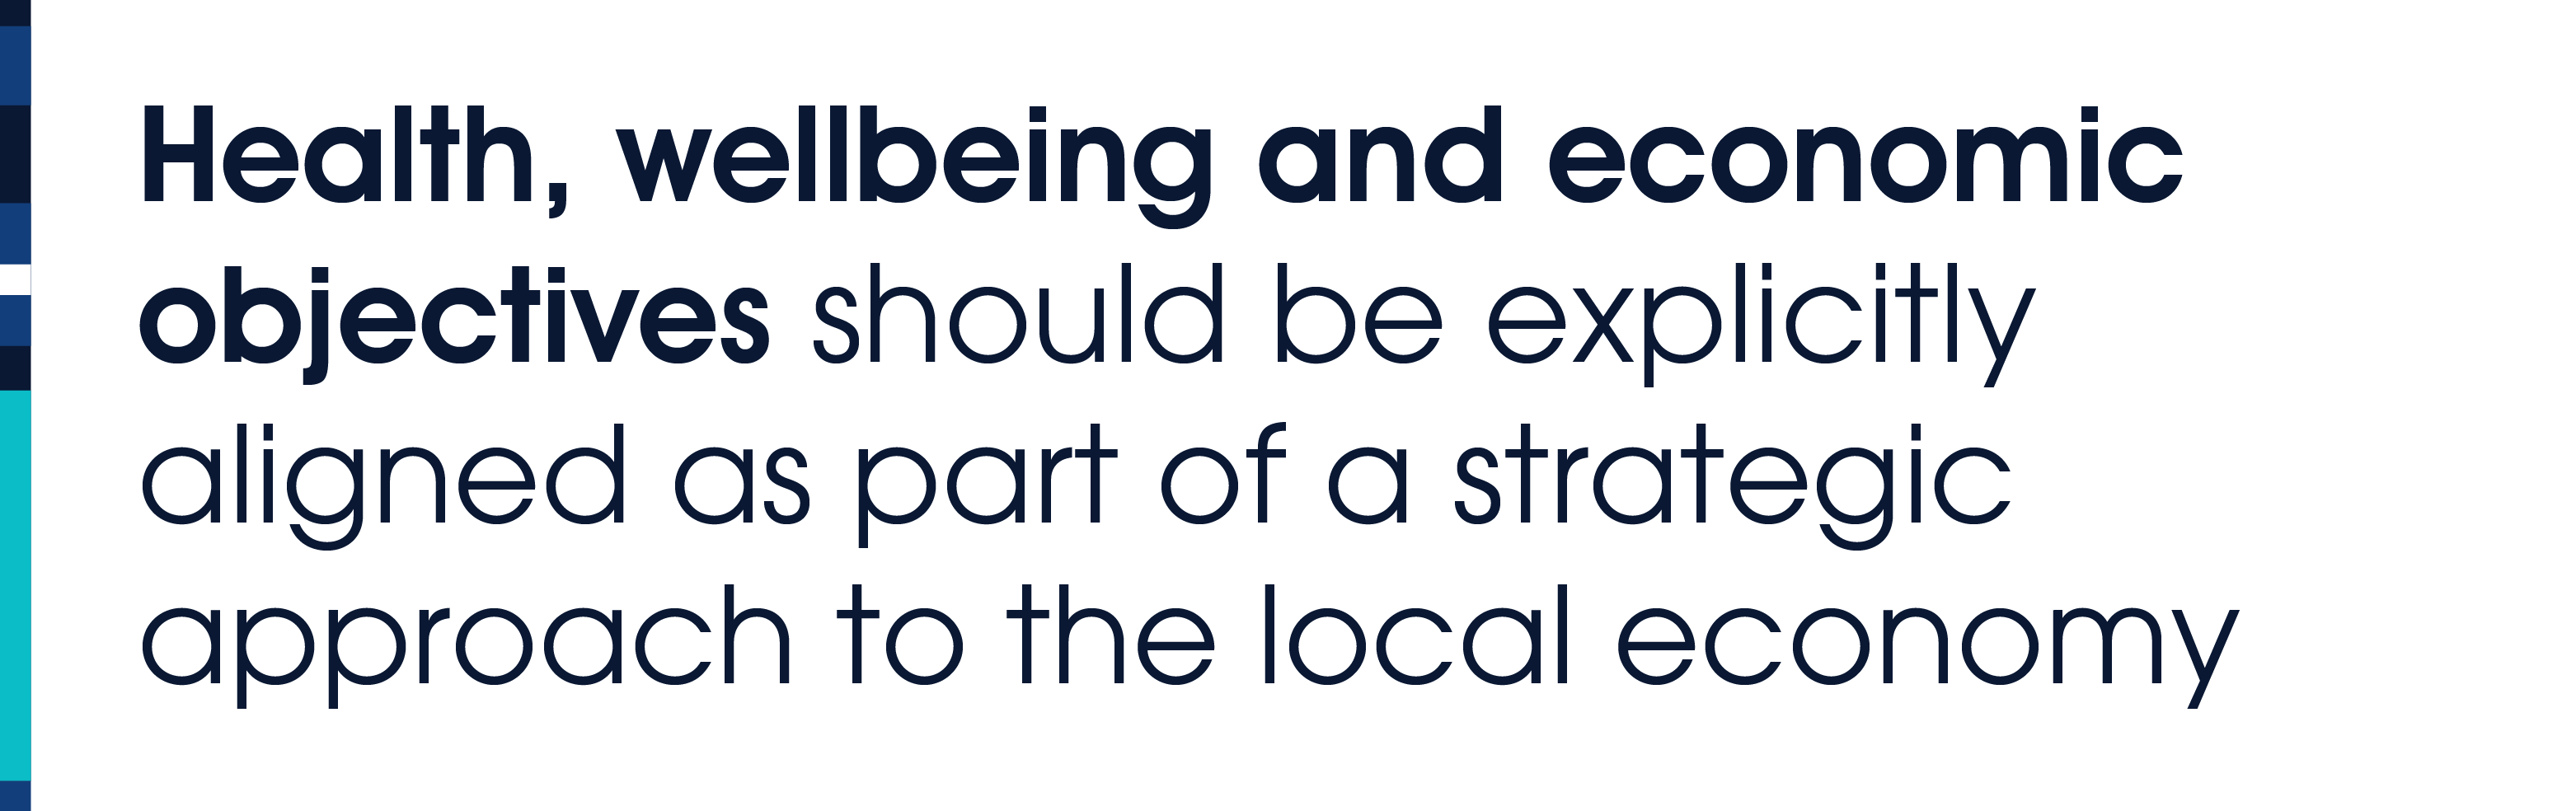 Health, wellbeing and economic objectives should be explicitly aligned as part of a strategic approach to the local economy.